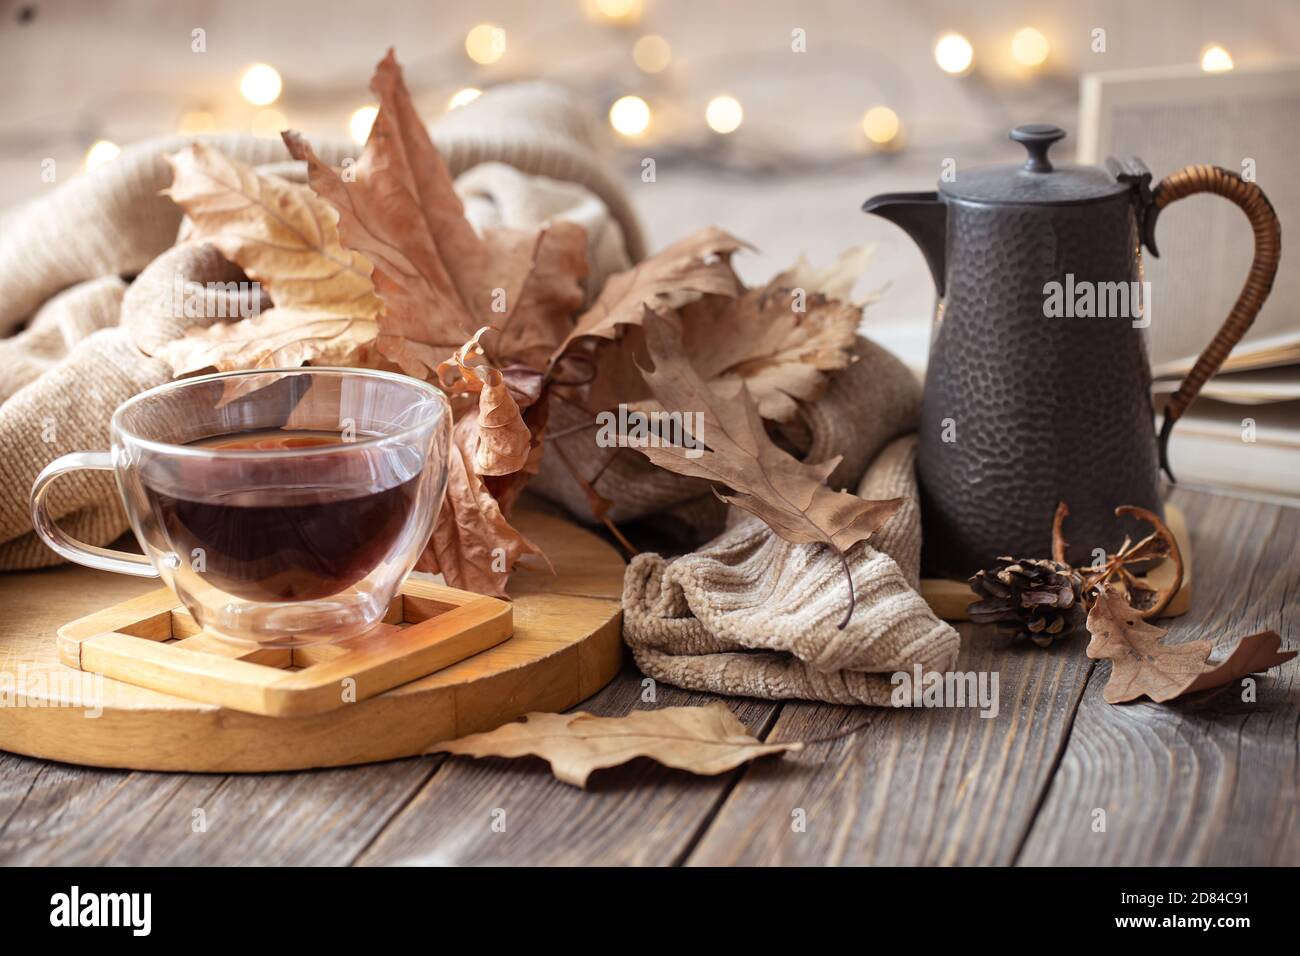 Cozy autumn still life in a homely atmosphere with decorative items. Stock Photo